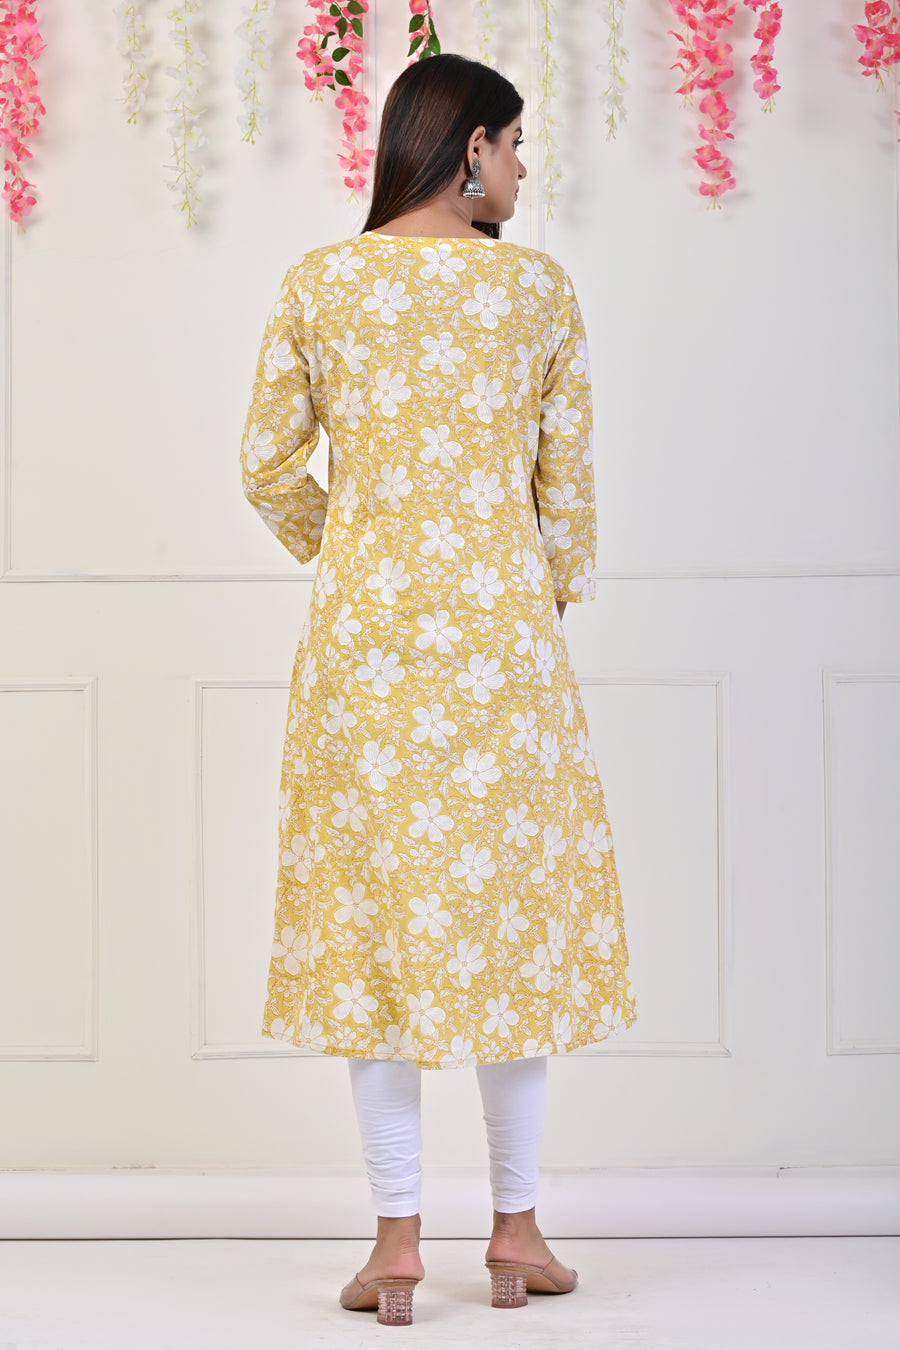 Elevate your style With Kurtis